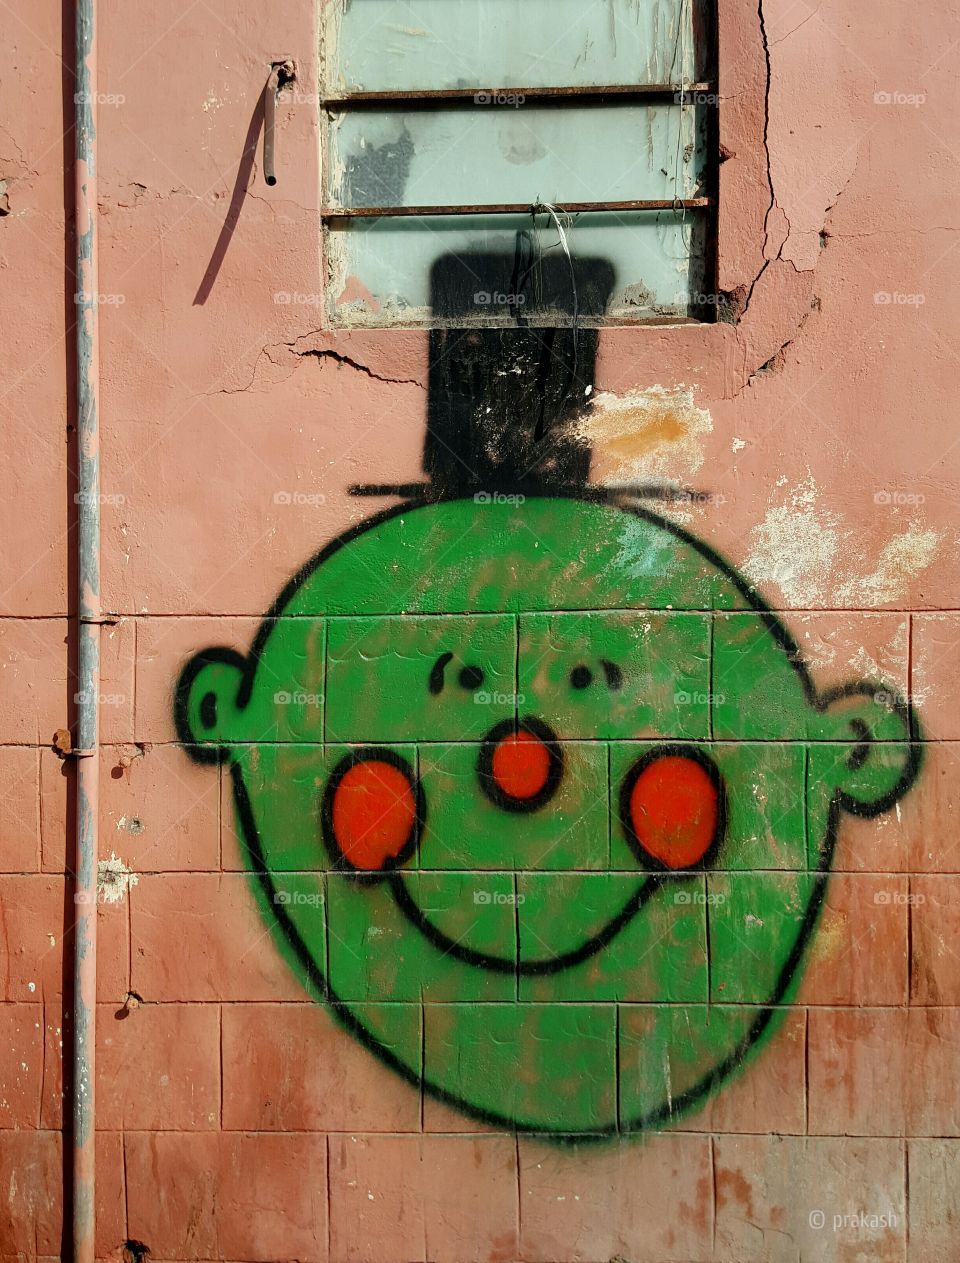 A Smiling Green colored Cartoon creature graffiti painted on a orange wall in the streets of Jaipur India.